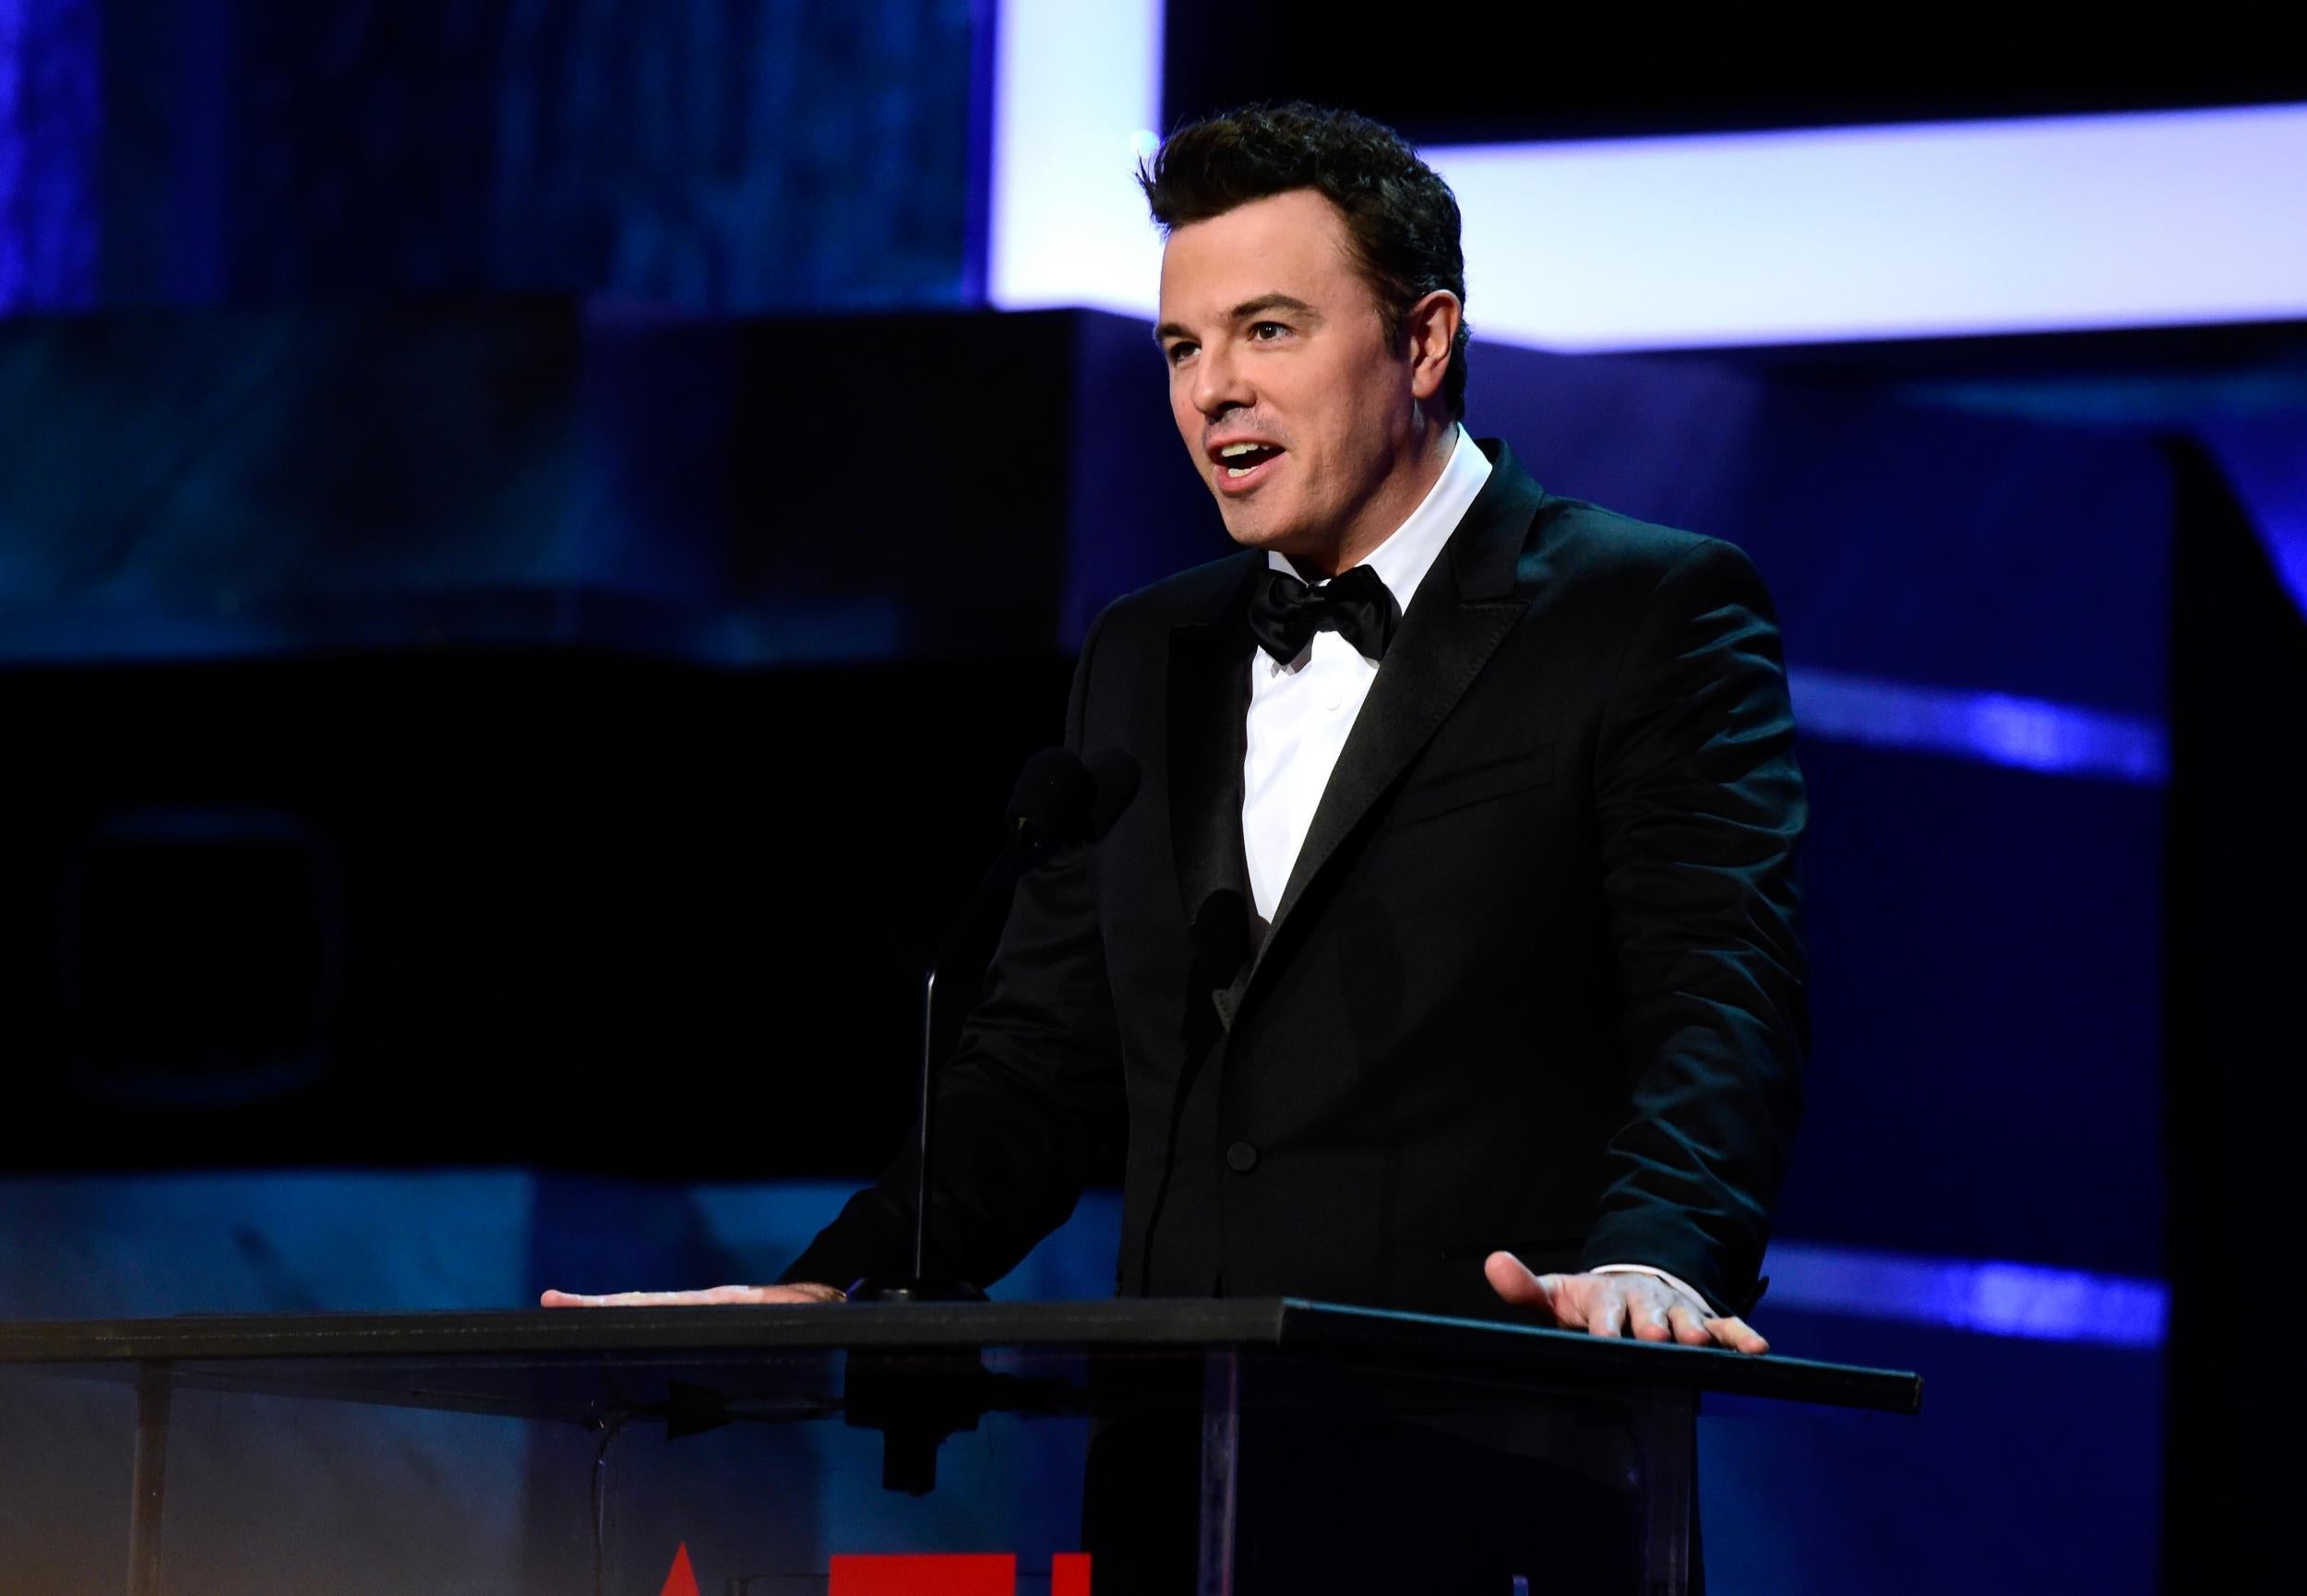 Family Guy creator Seth MacFarlane pens theory on why Hollywood hates Trump: 'We live and work among his kind' - The Independent